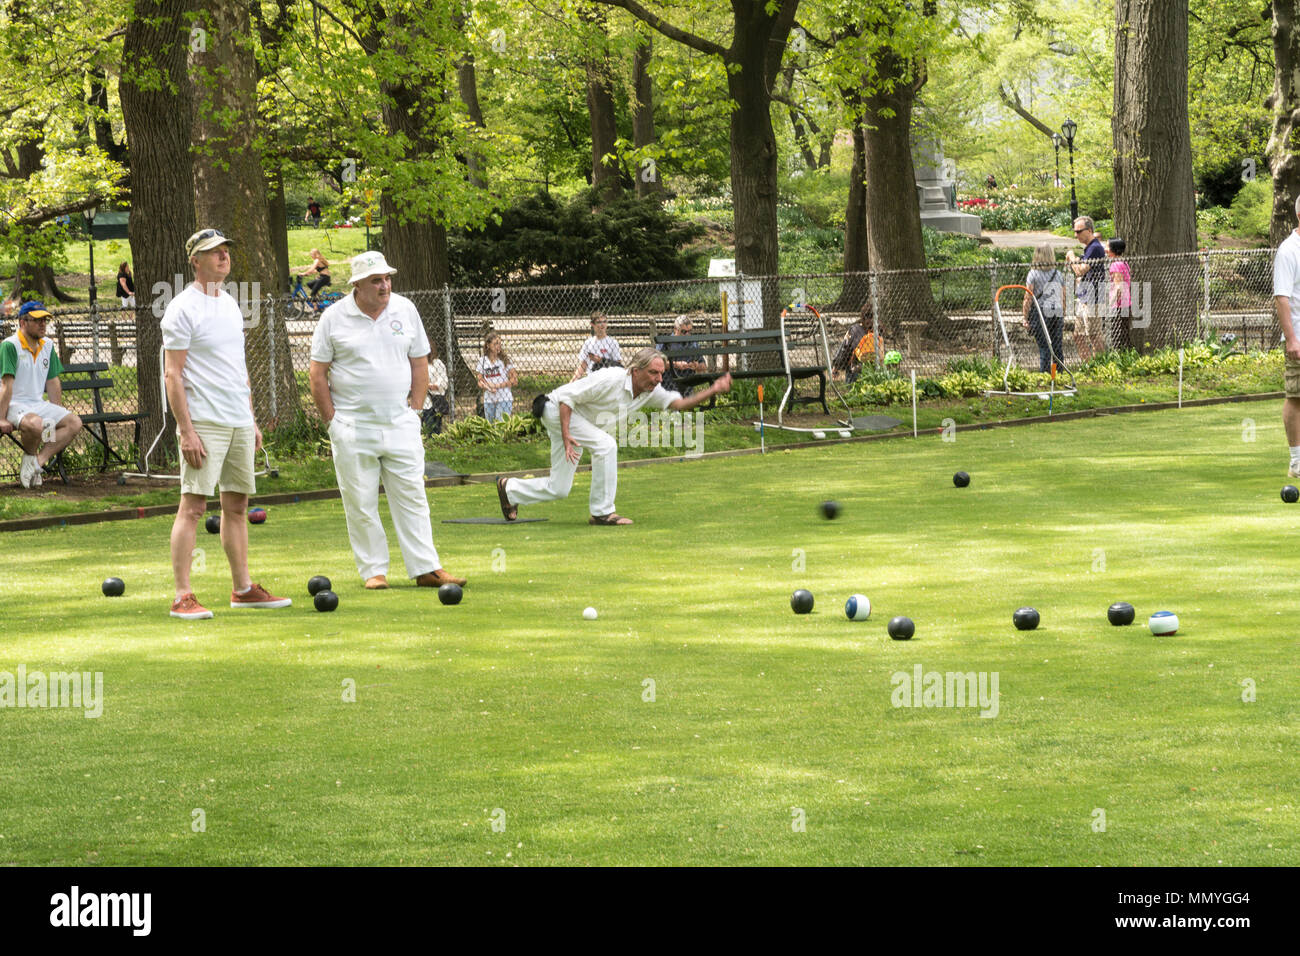 Central Park has a Lawn Bowling Club, NYC, USA Stock Photo